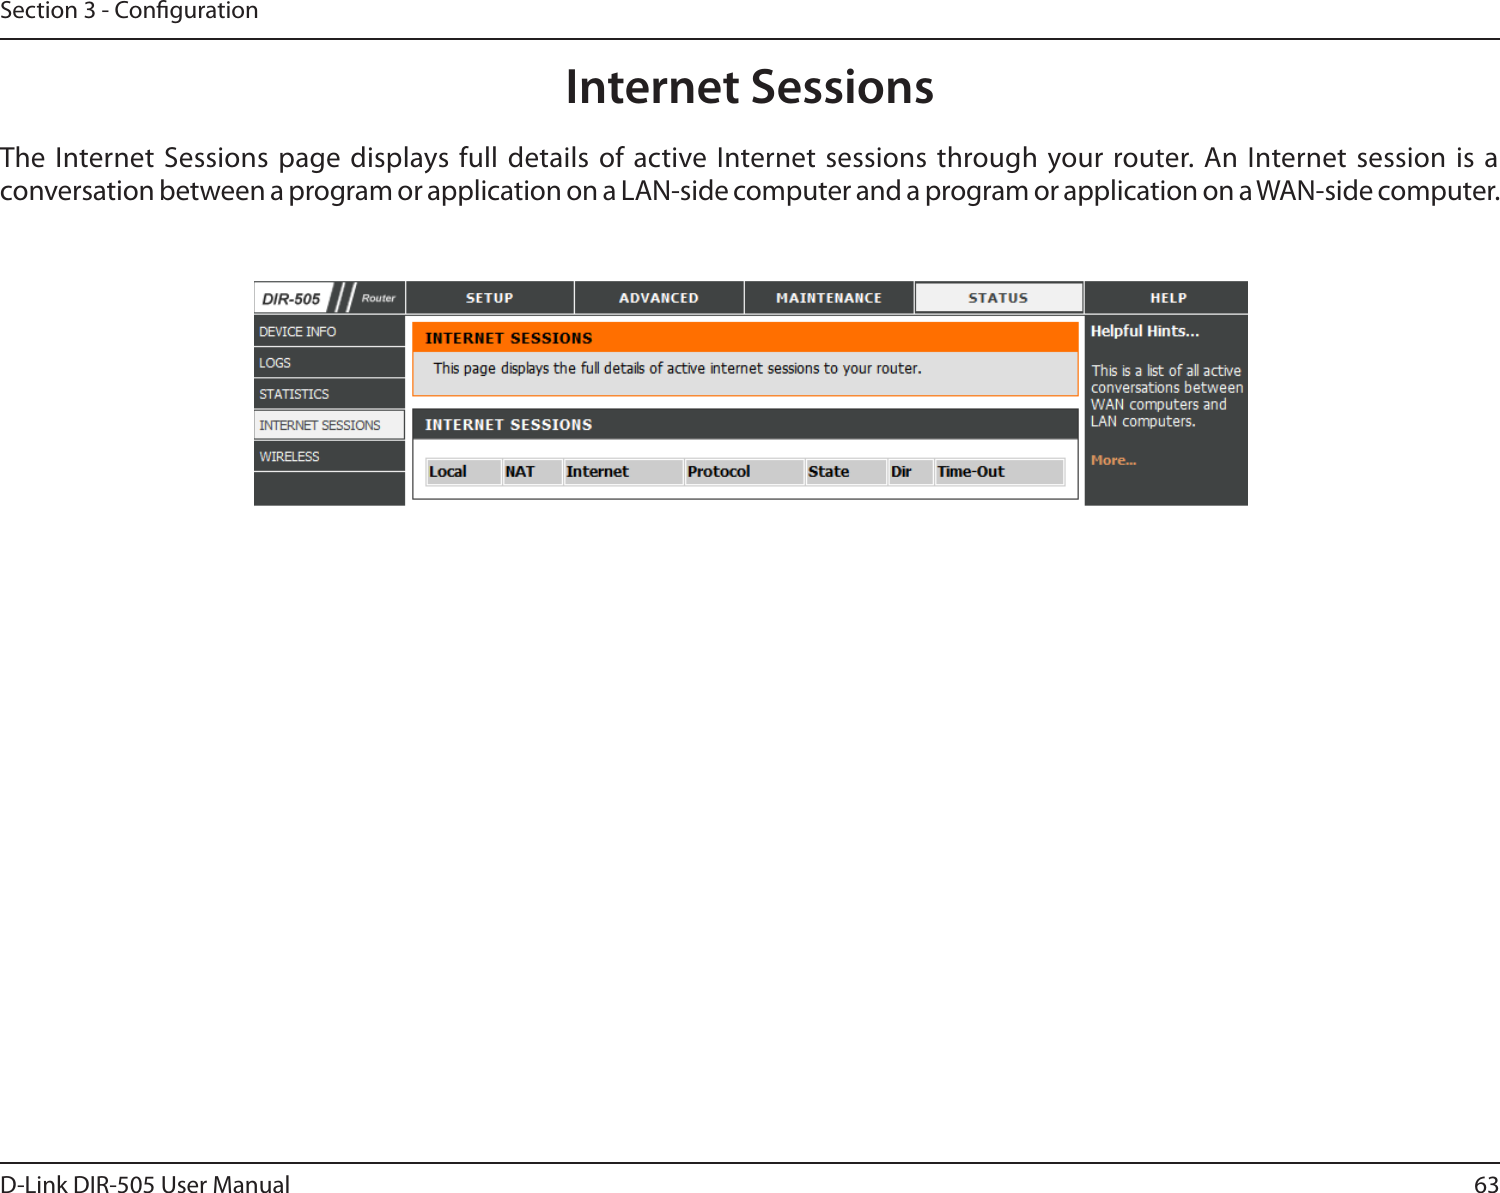 63D-Link DIR-505 User ManualSection 3 - CongurationInternet SessionsThe Internet Sessions  page displays full details of active Internet sessions  through your router. An Internet session is a conversation between a program or application on a LAN-side computer and a program or application on a WAN-side computer. 